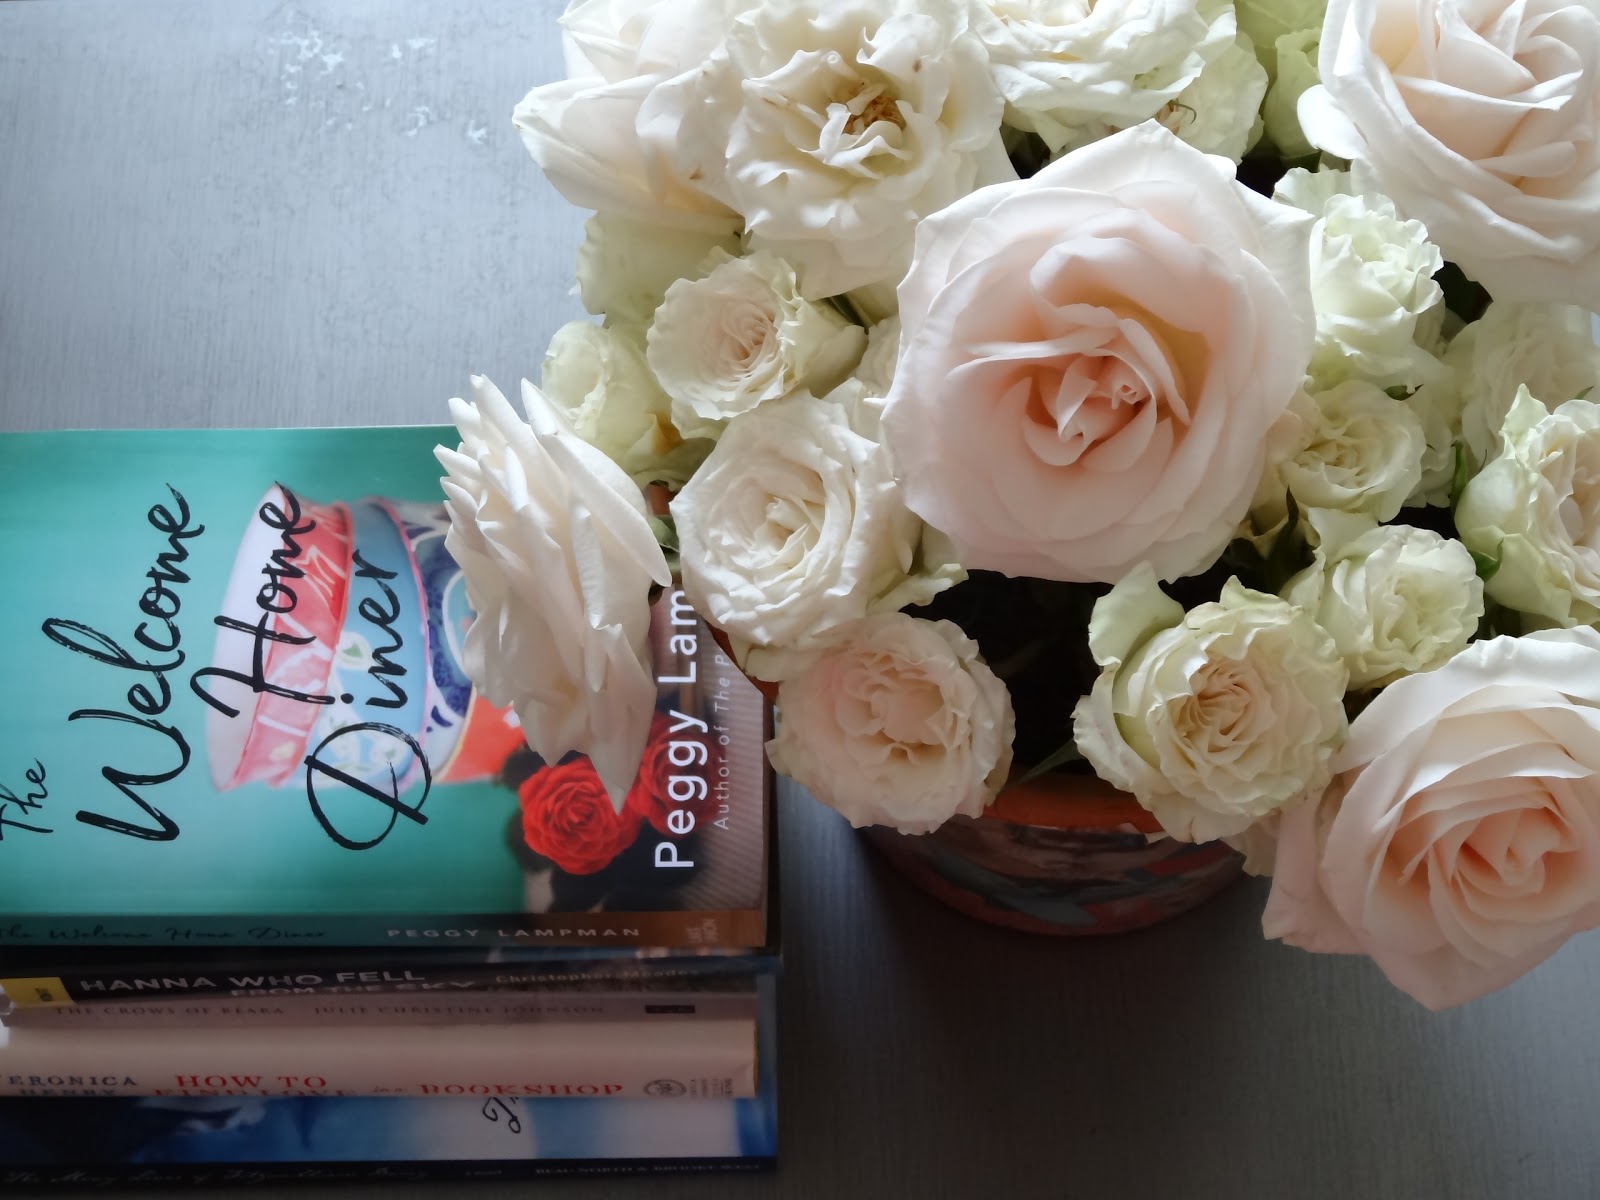 The Sketchy Reader: Books and Flowers